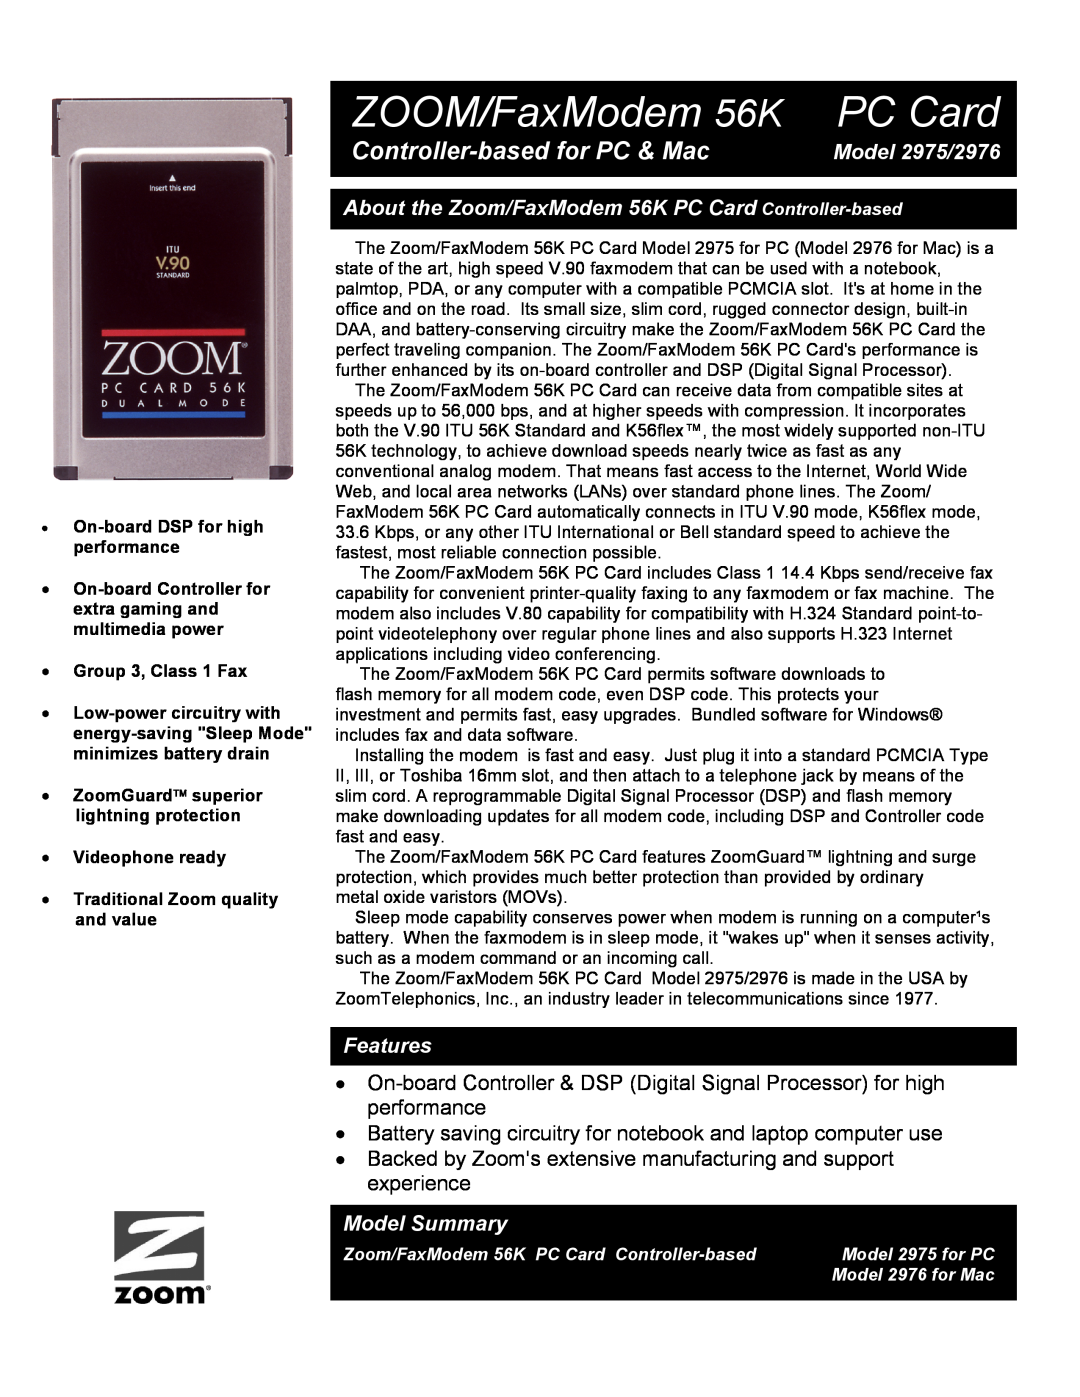 Zoom 2976 manual On-board DSP for high performance, On-board Controller for extra gaming and multimedia power, PC Card 